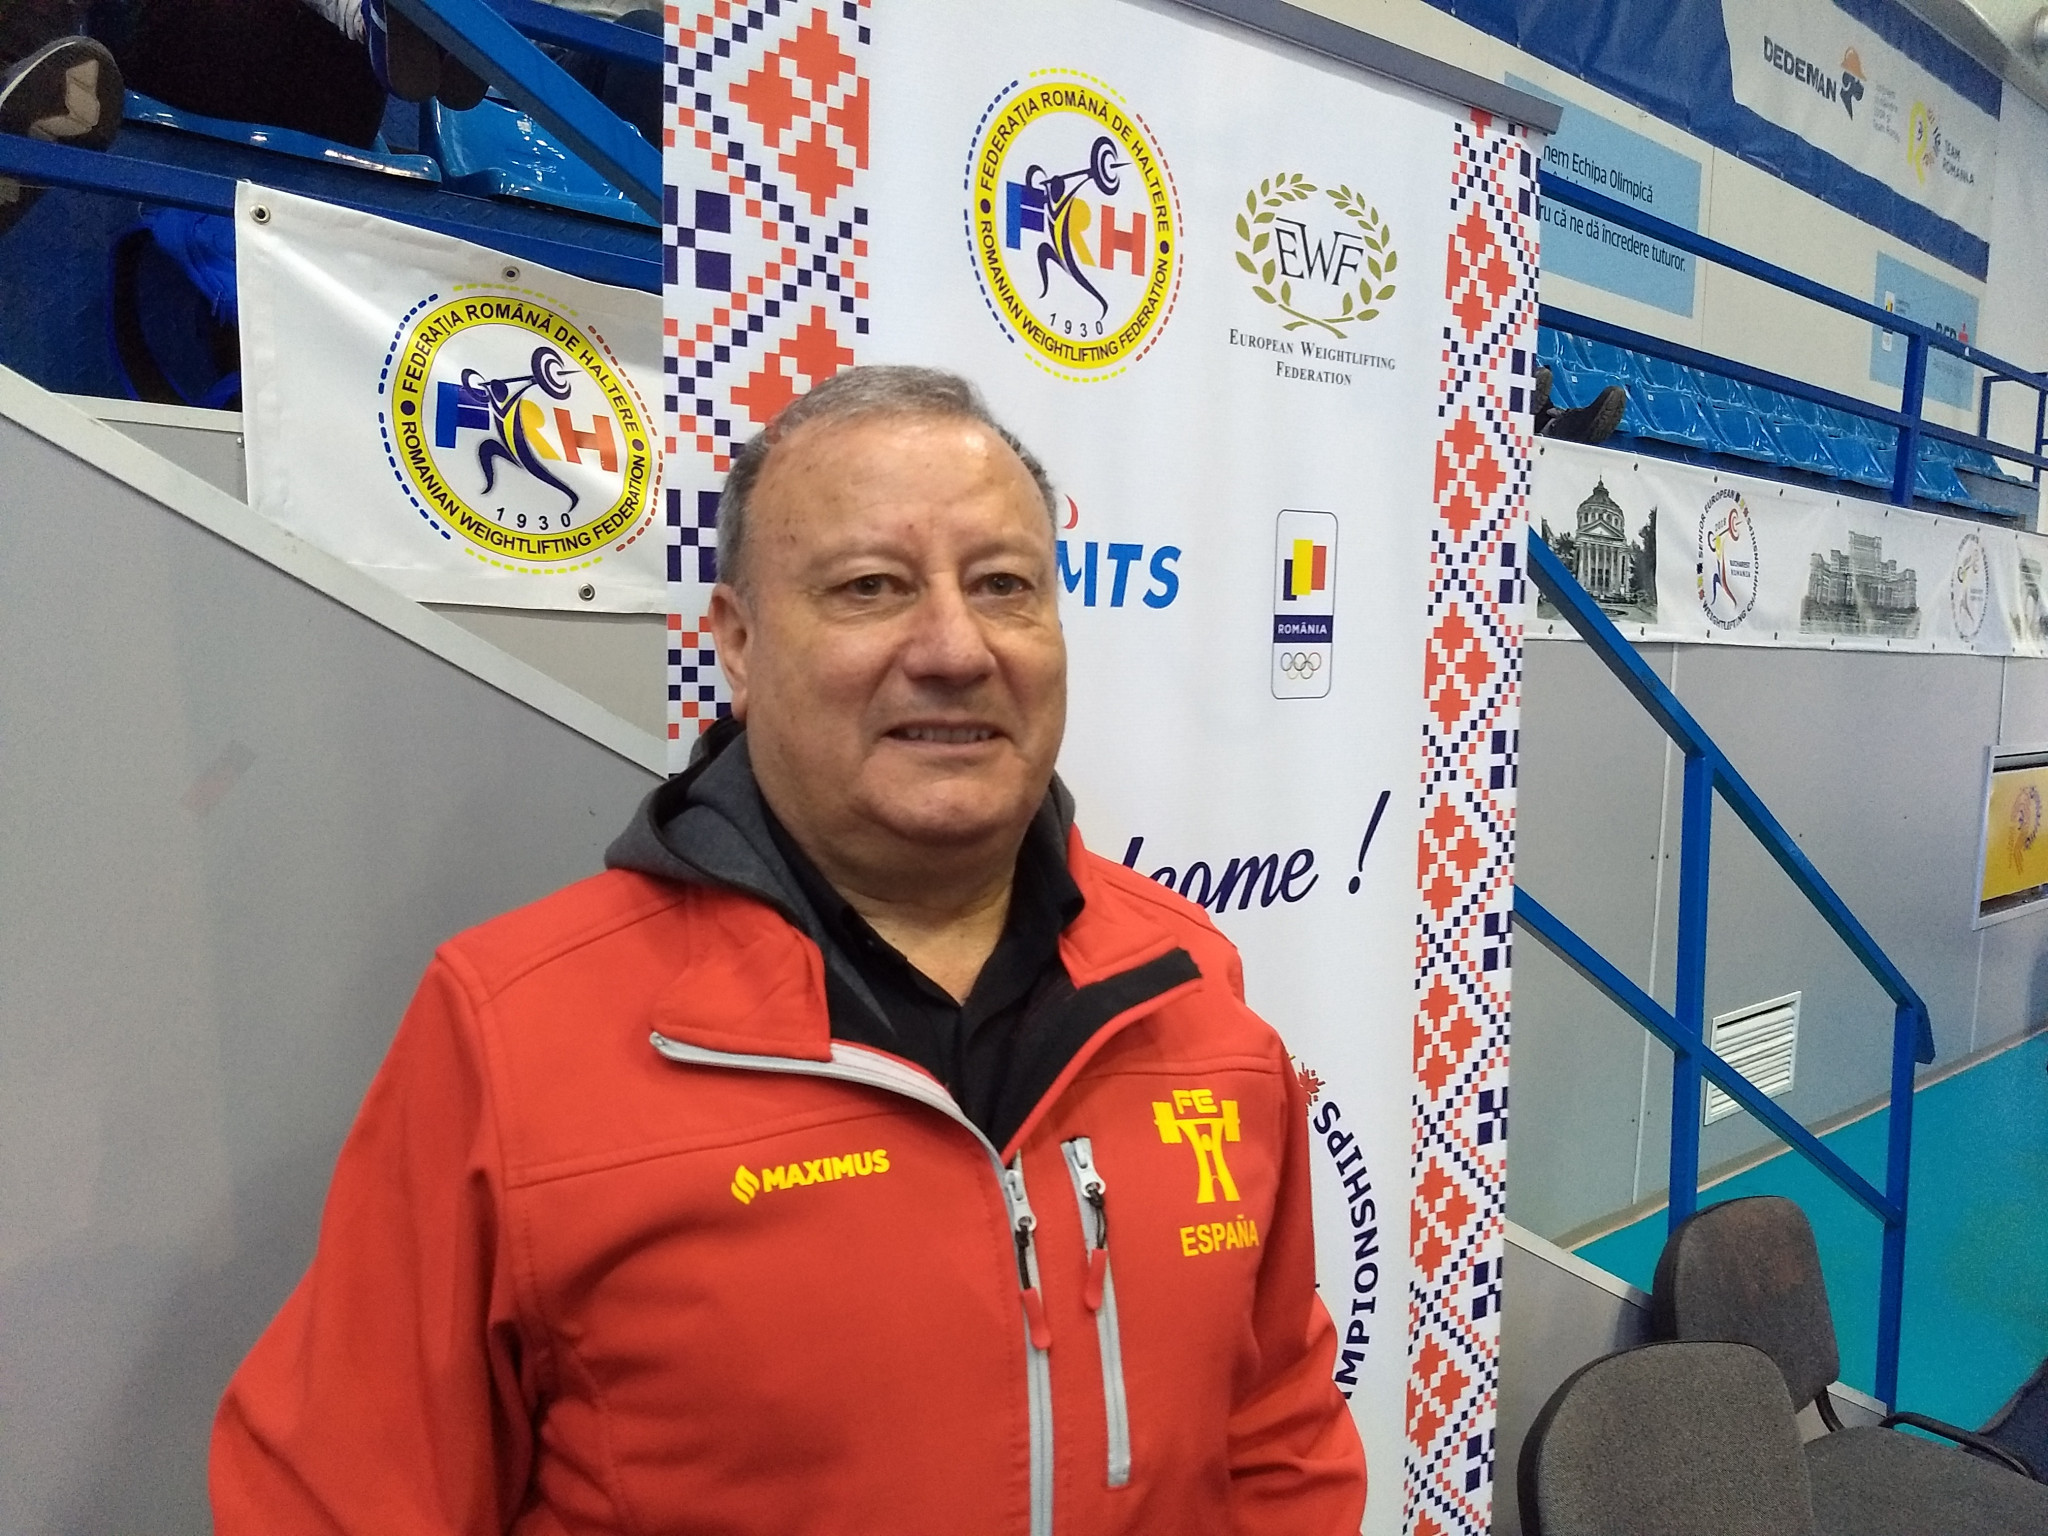 Constantino Iglesias, President of the Spanish Weightlifting Federation, is calling for help so that Kosovo can compete at the European Junior and Under-23 Championships in La Coruna in October ©Brian Oliver/ITG